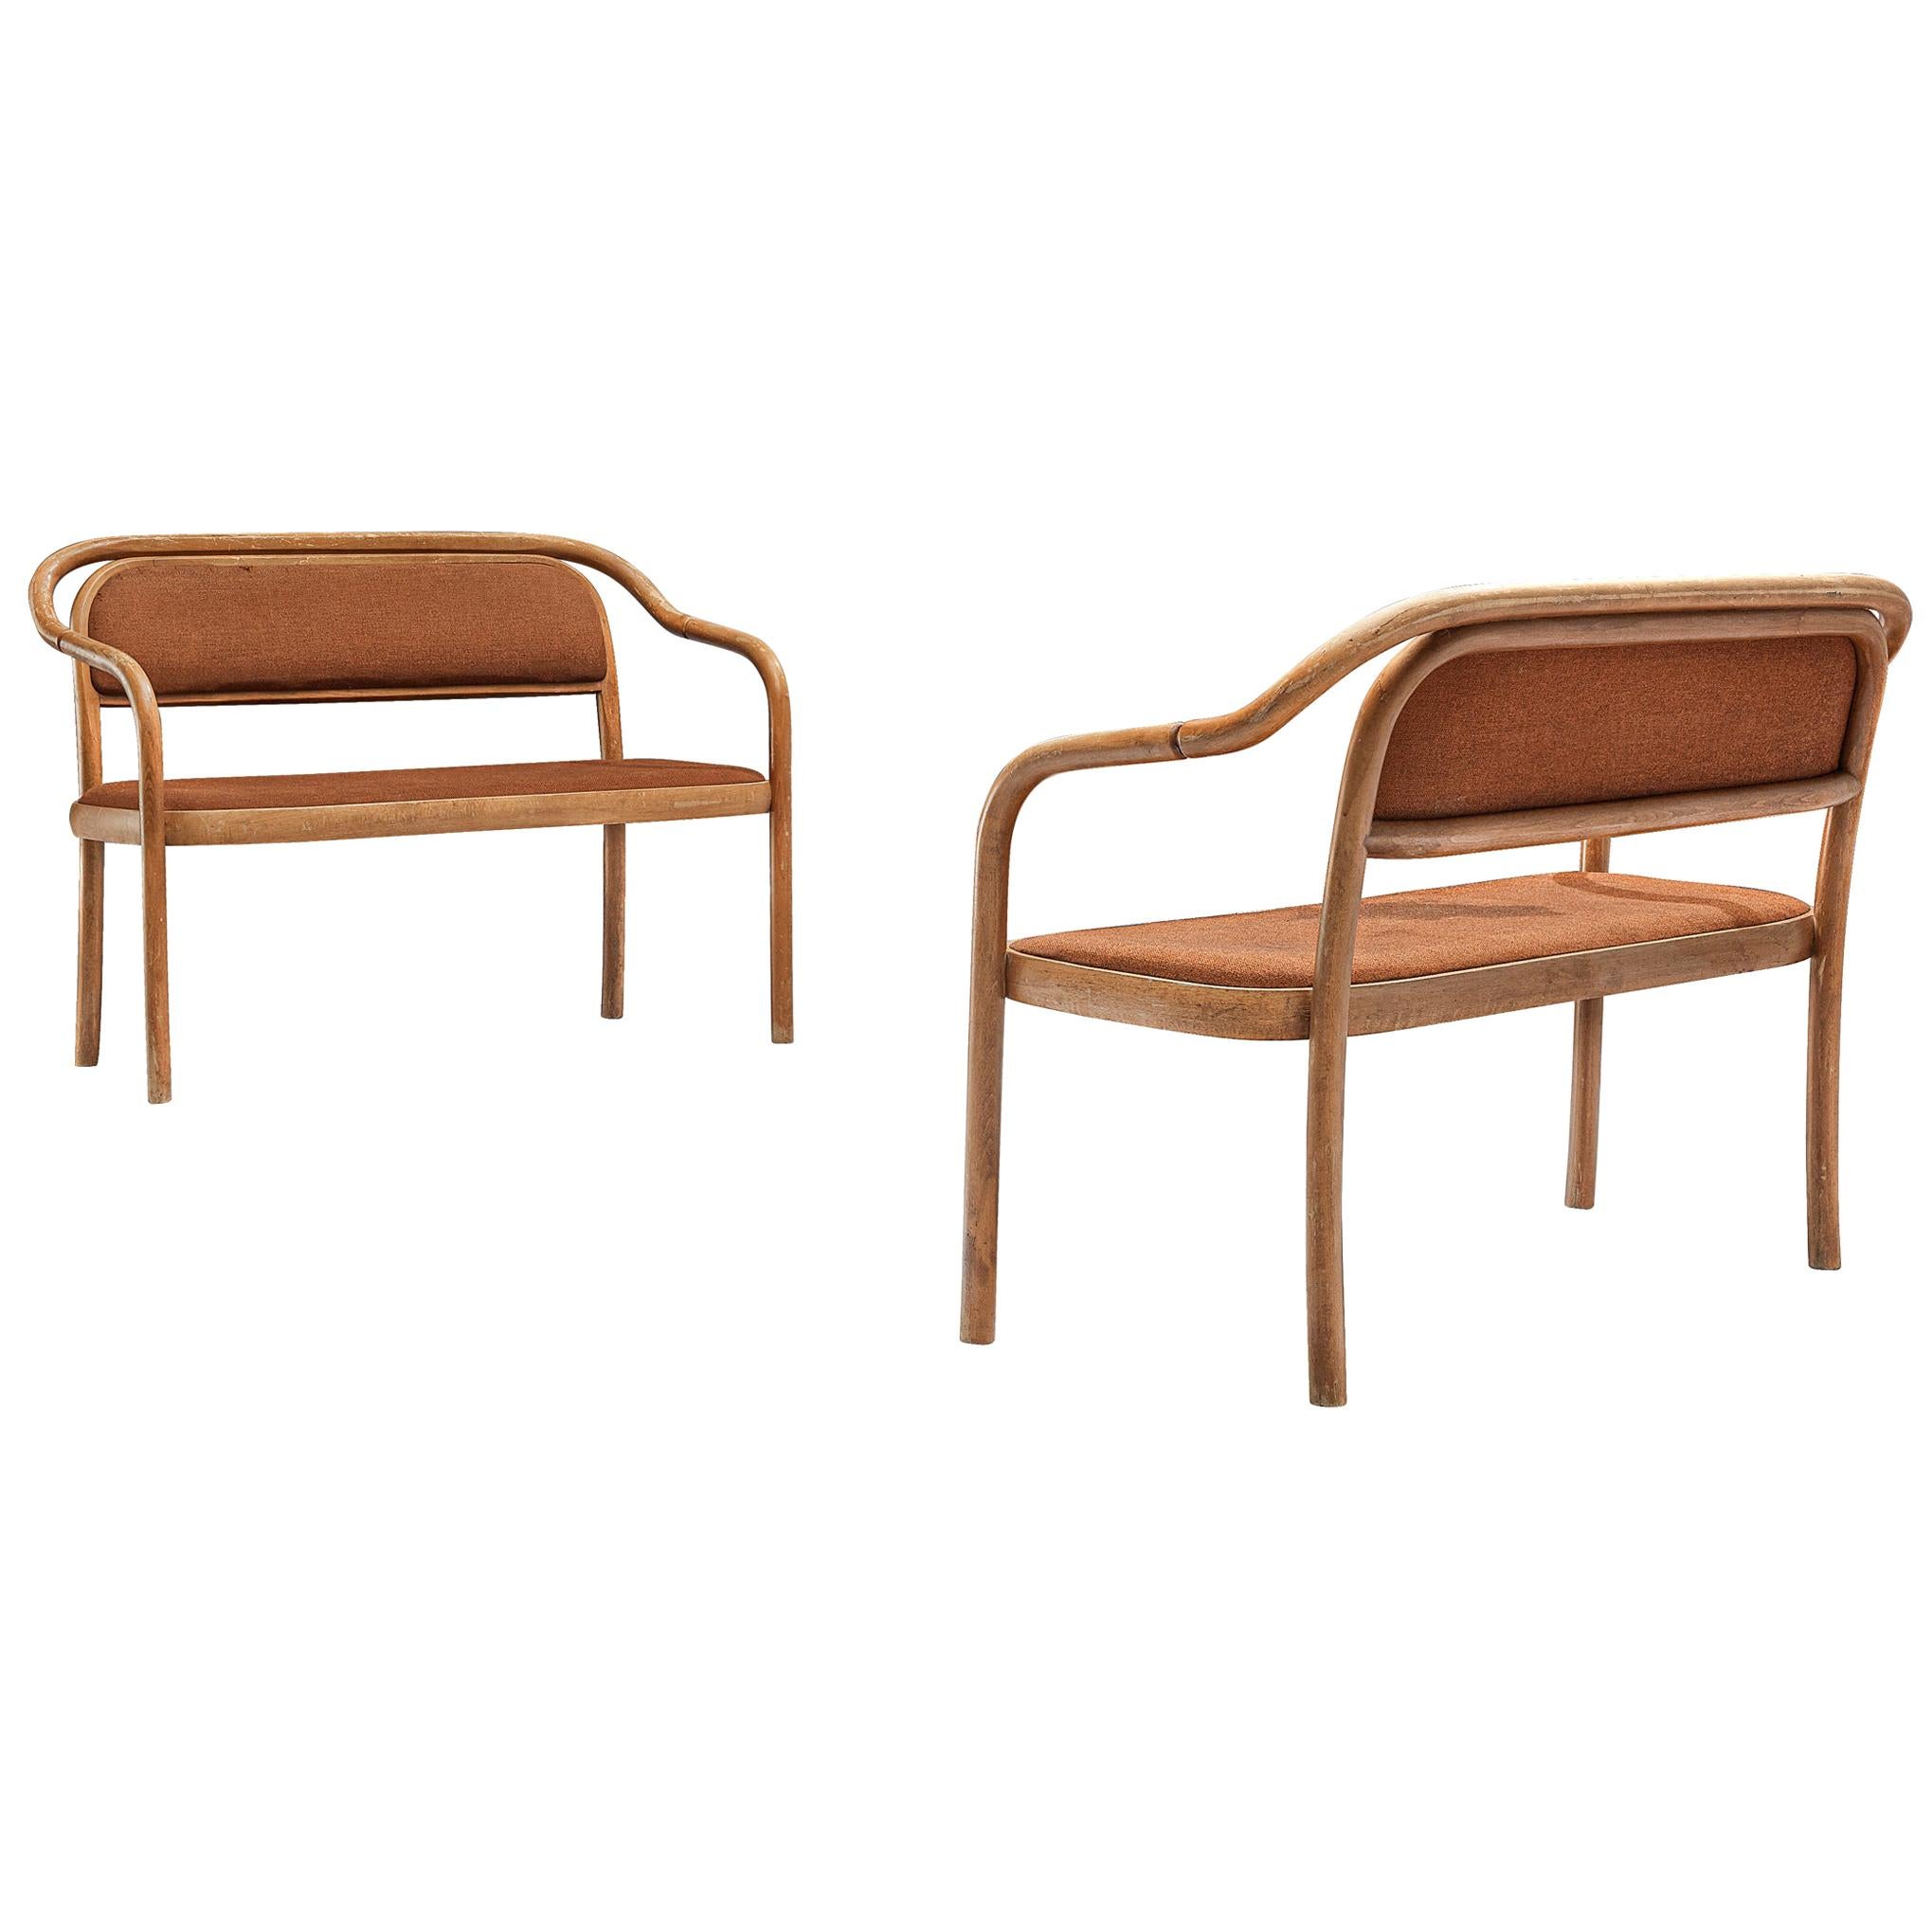 Mid-Century Modern Pair of Benches by Ton in Bentwood